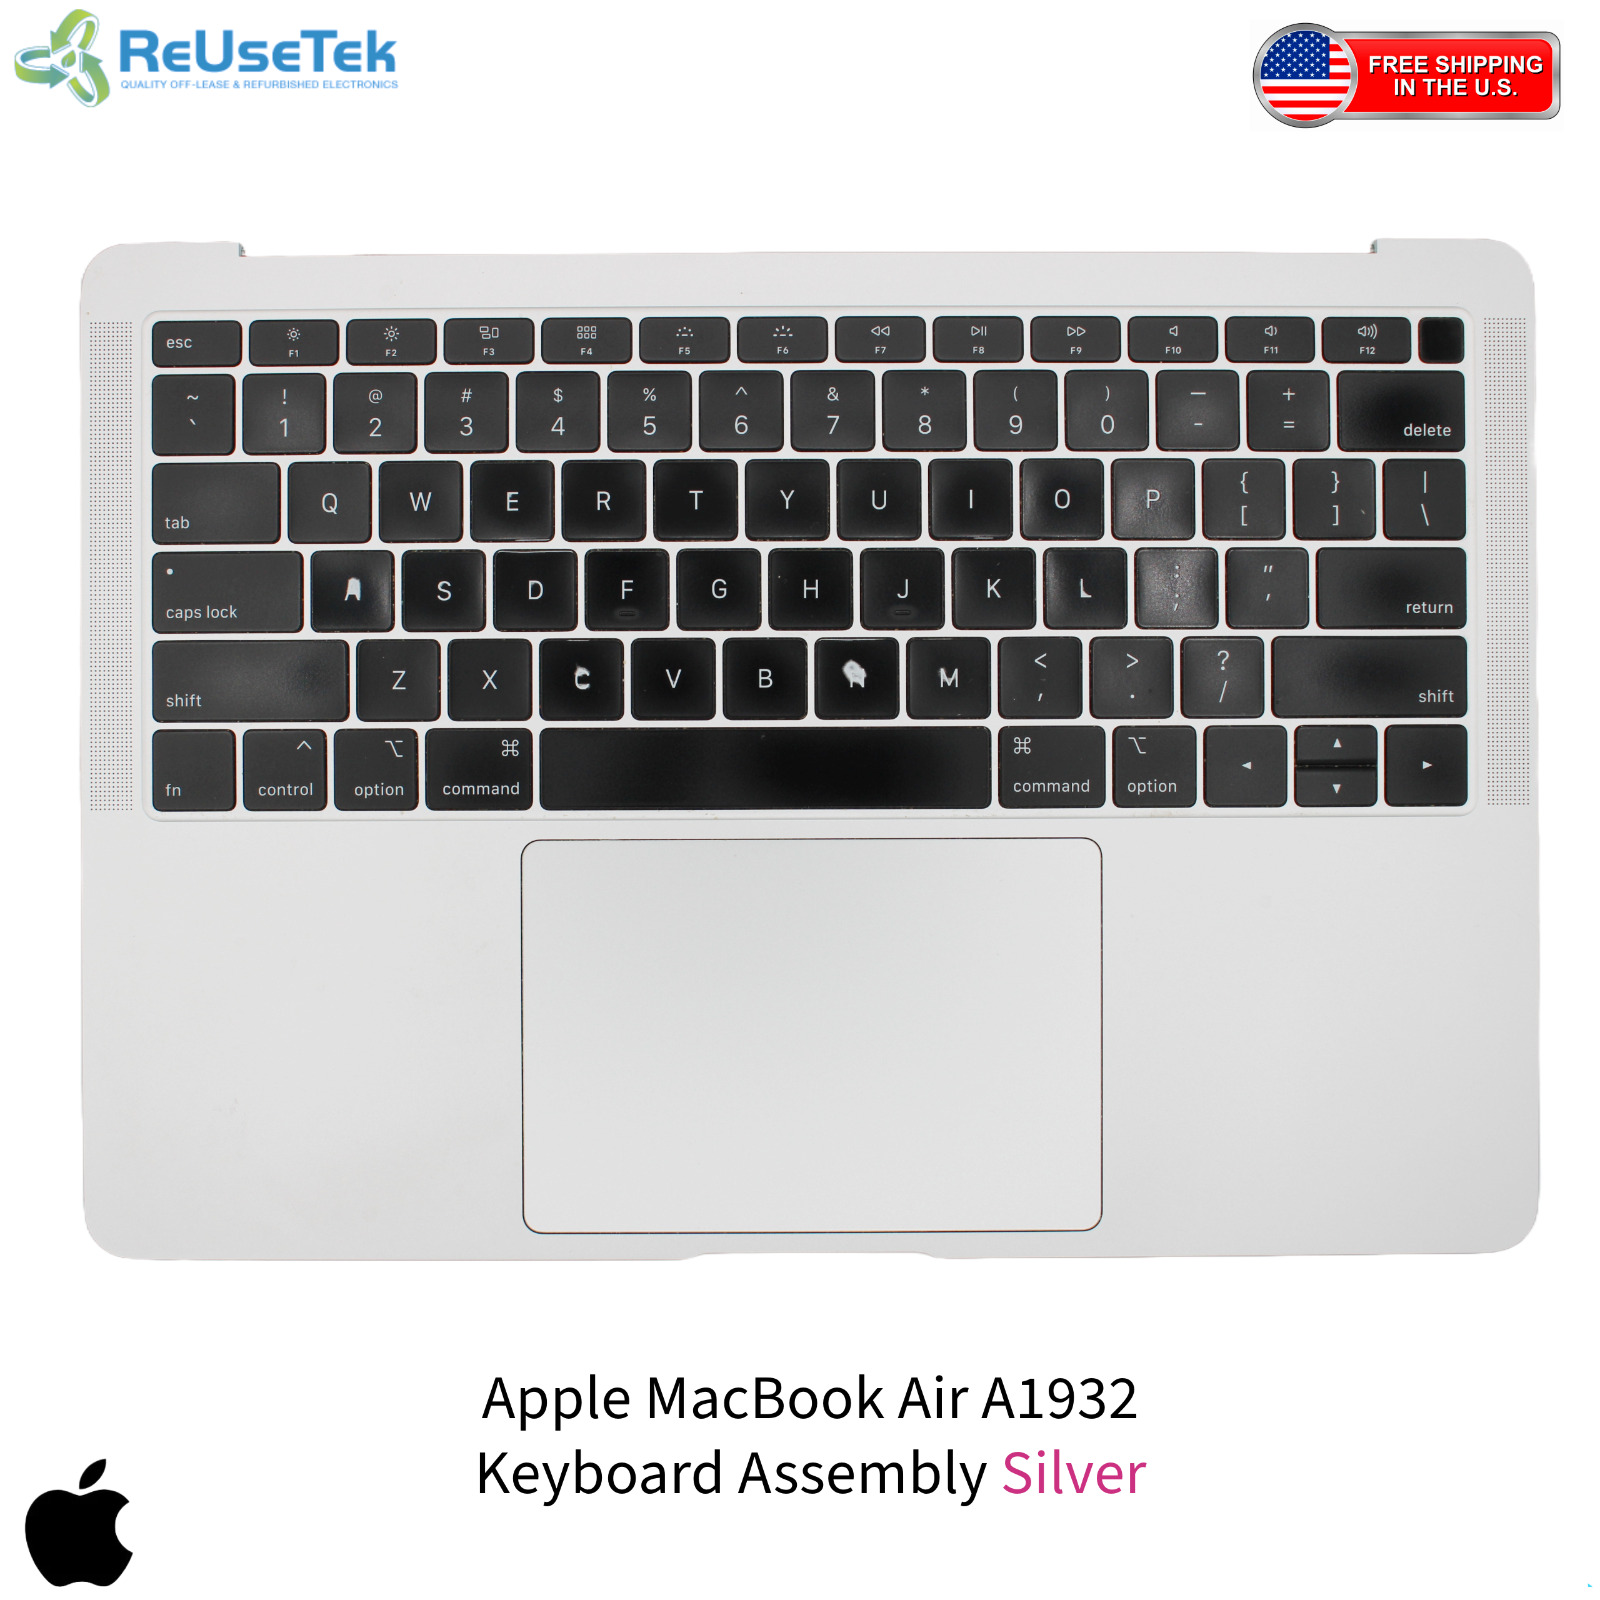 Apple MacBook Air A1932 Keyboard Assembly Silver